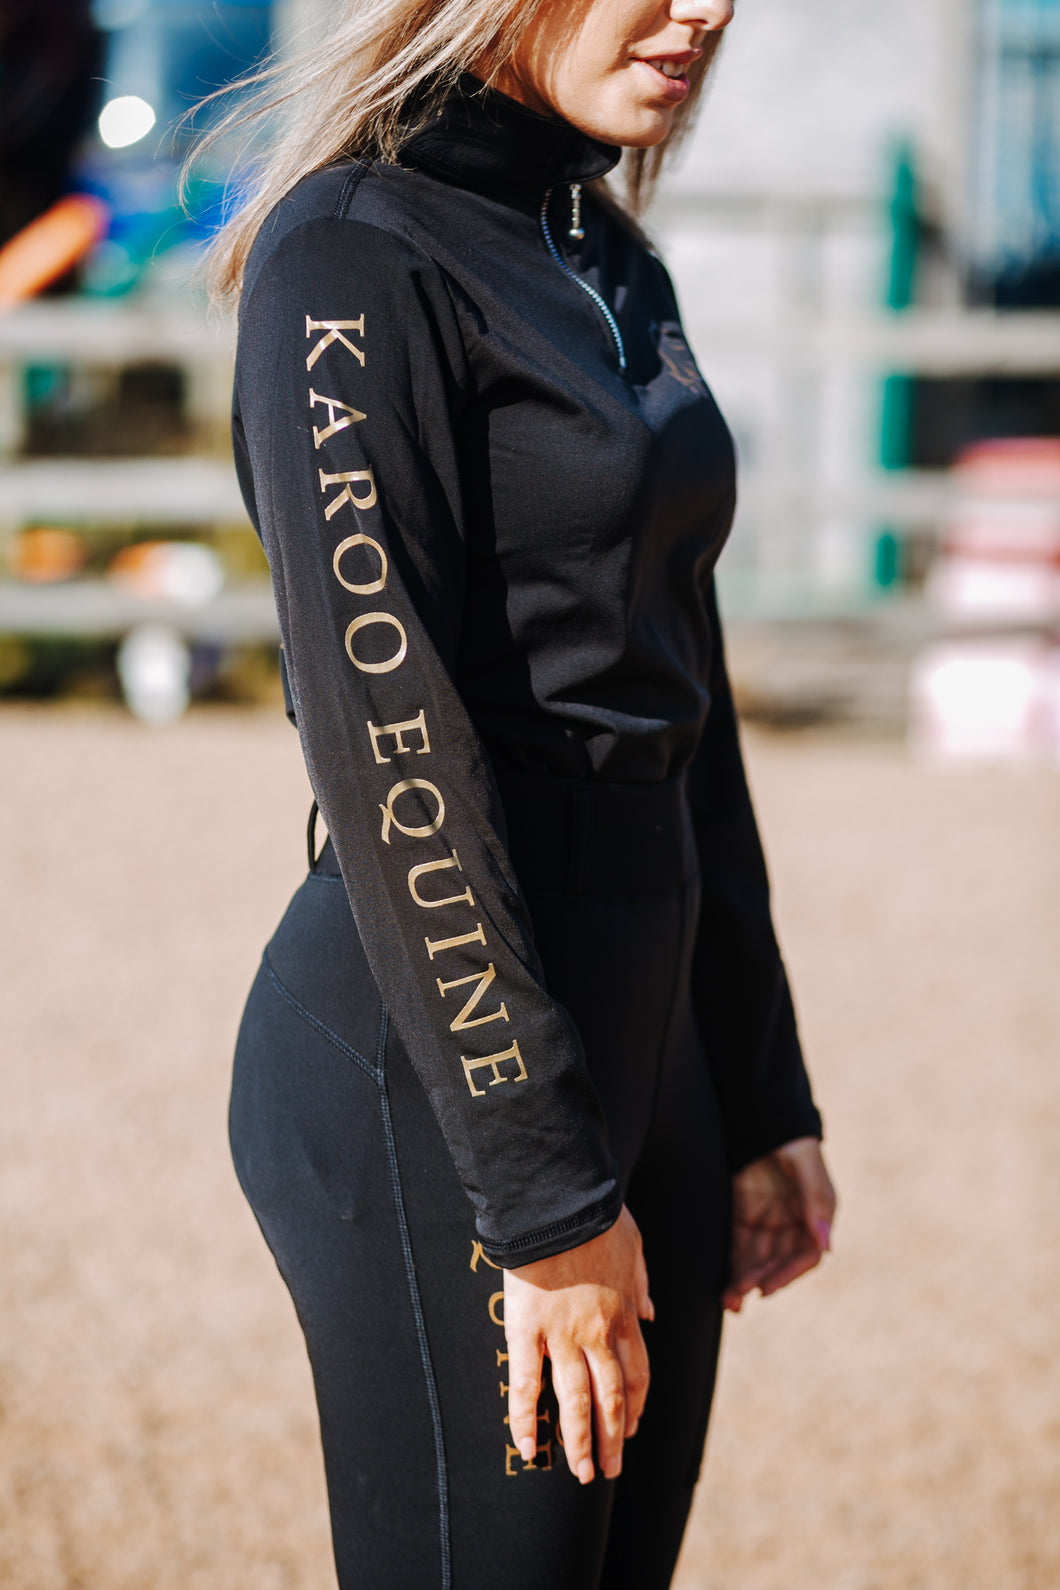 Base Layer - by Karoo Equine VERY LOW STOCK